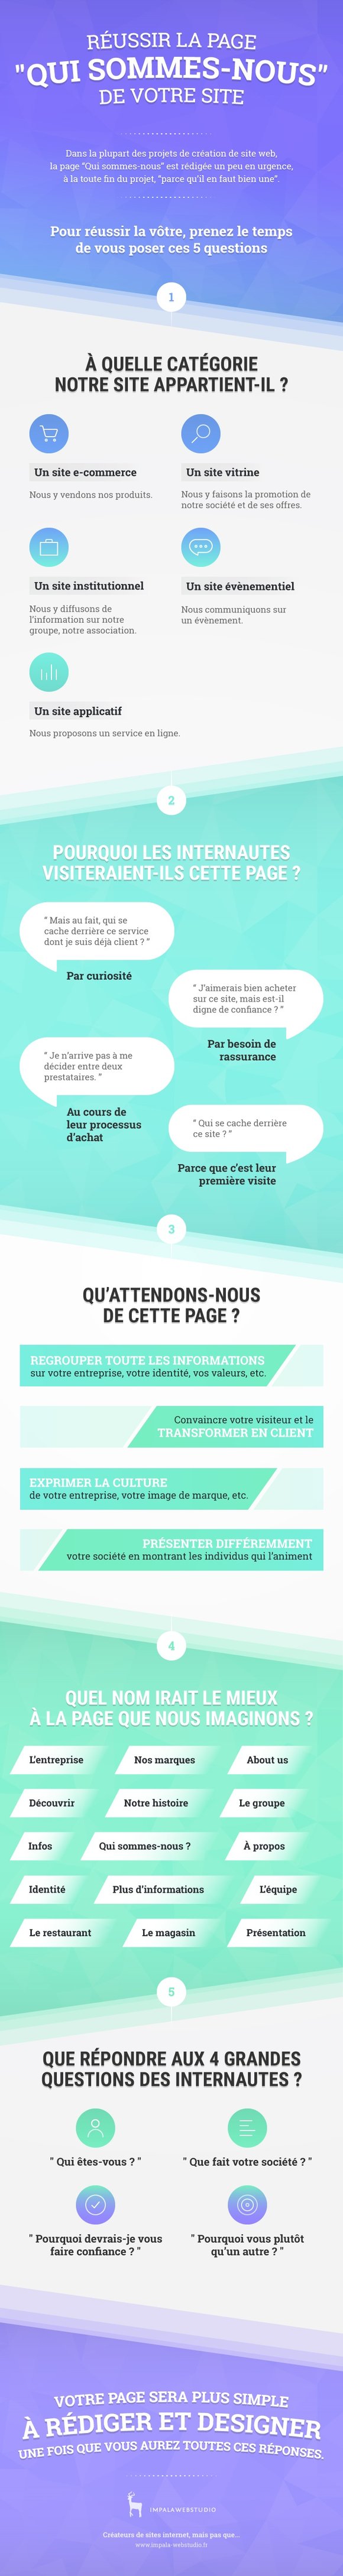 IWS_infographie-qui-sommes-nous_01.jpg